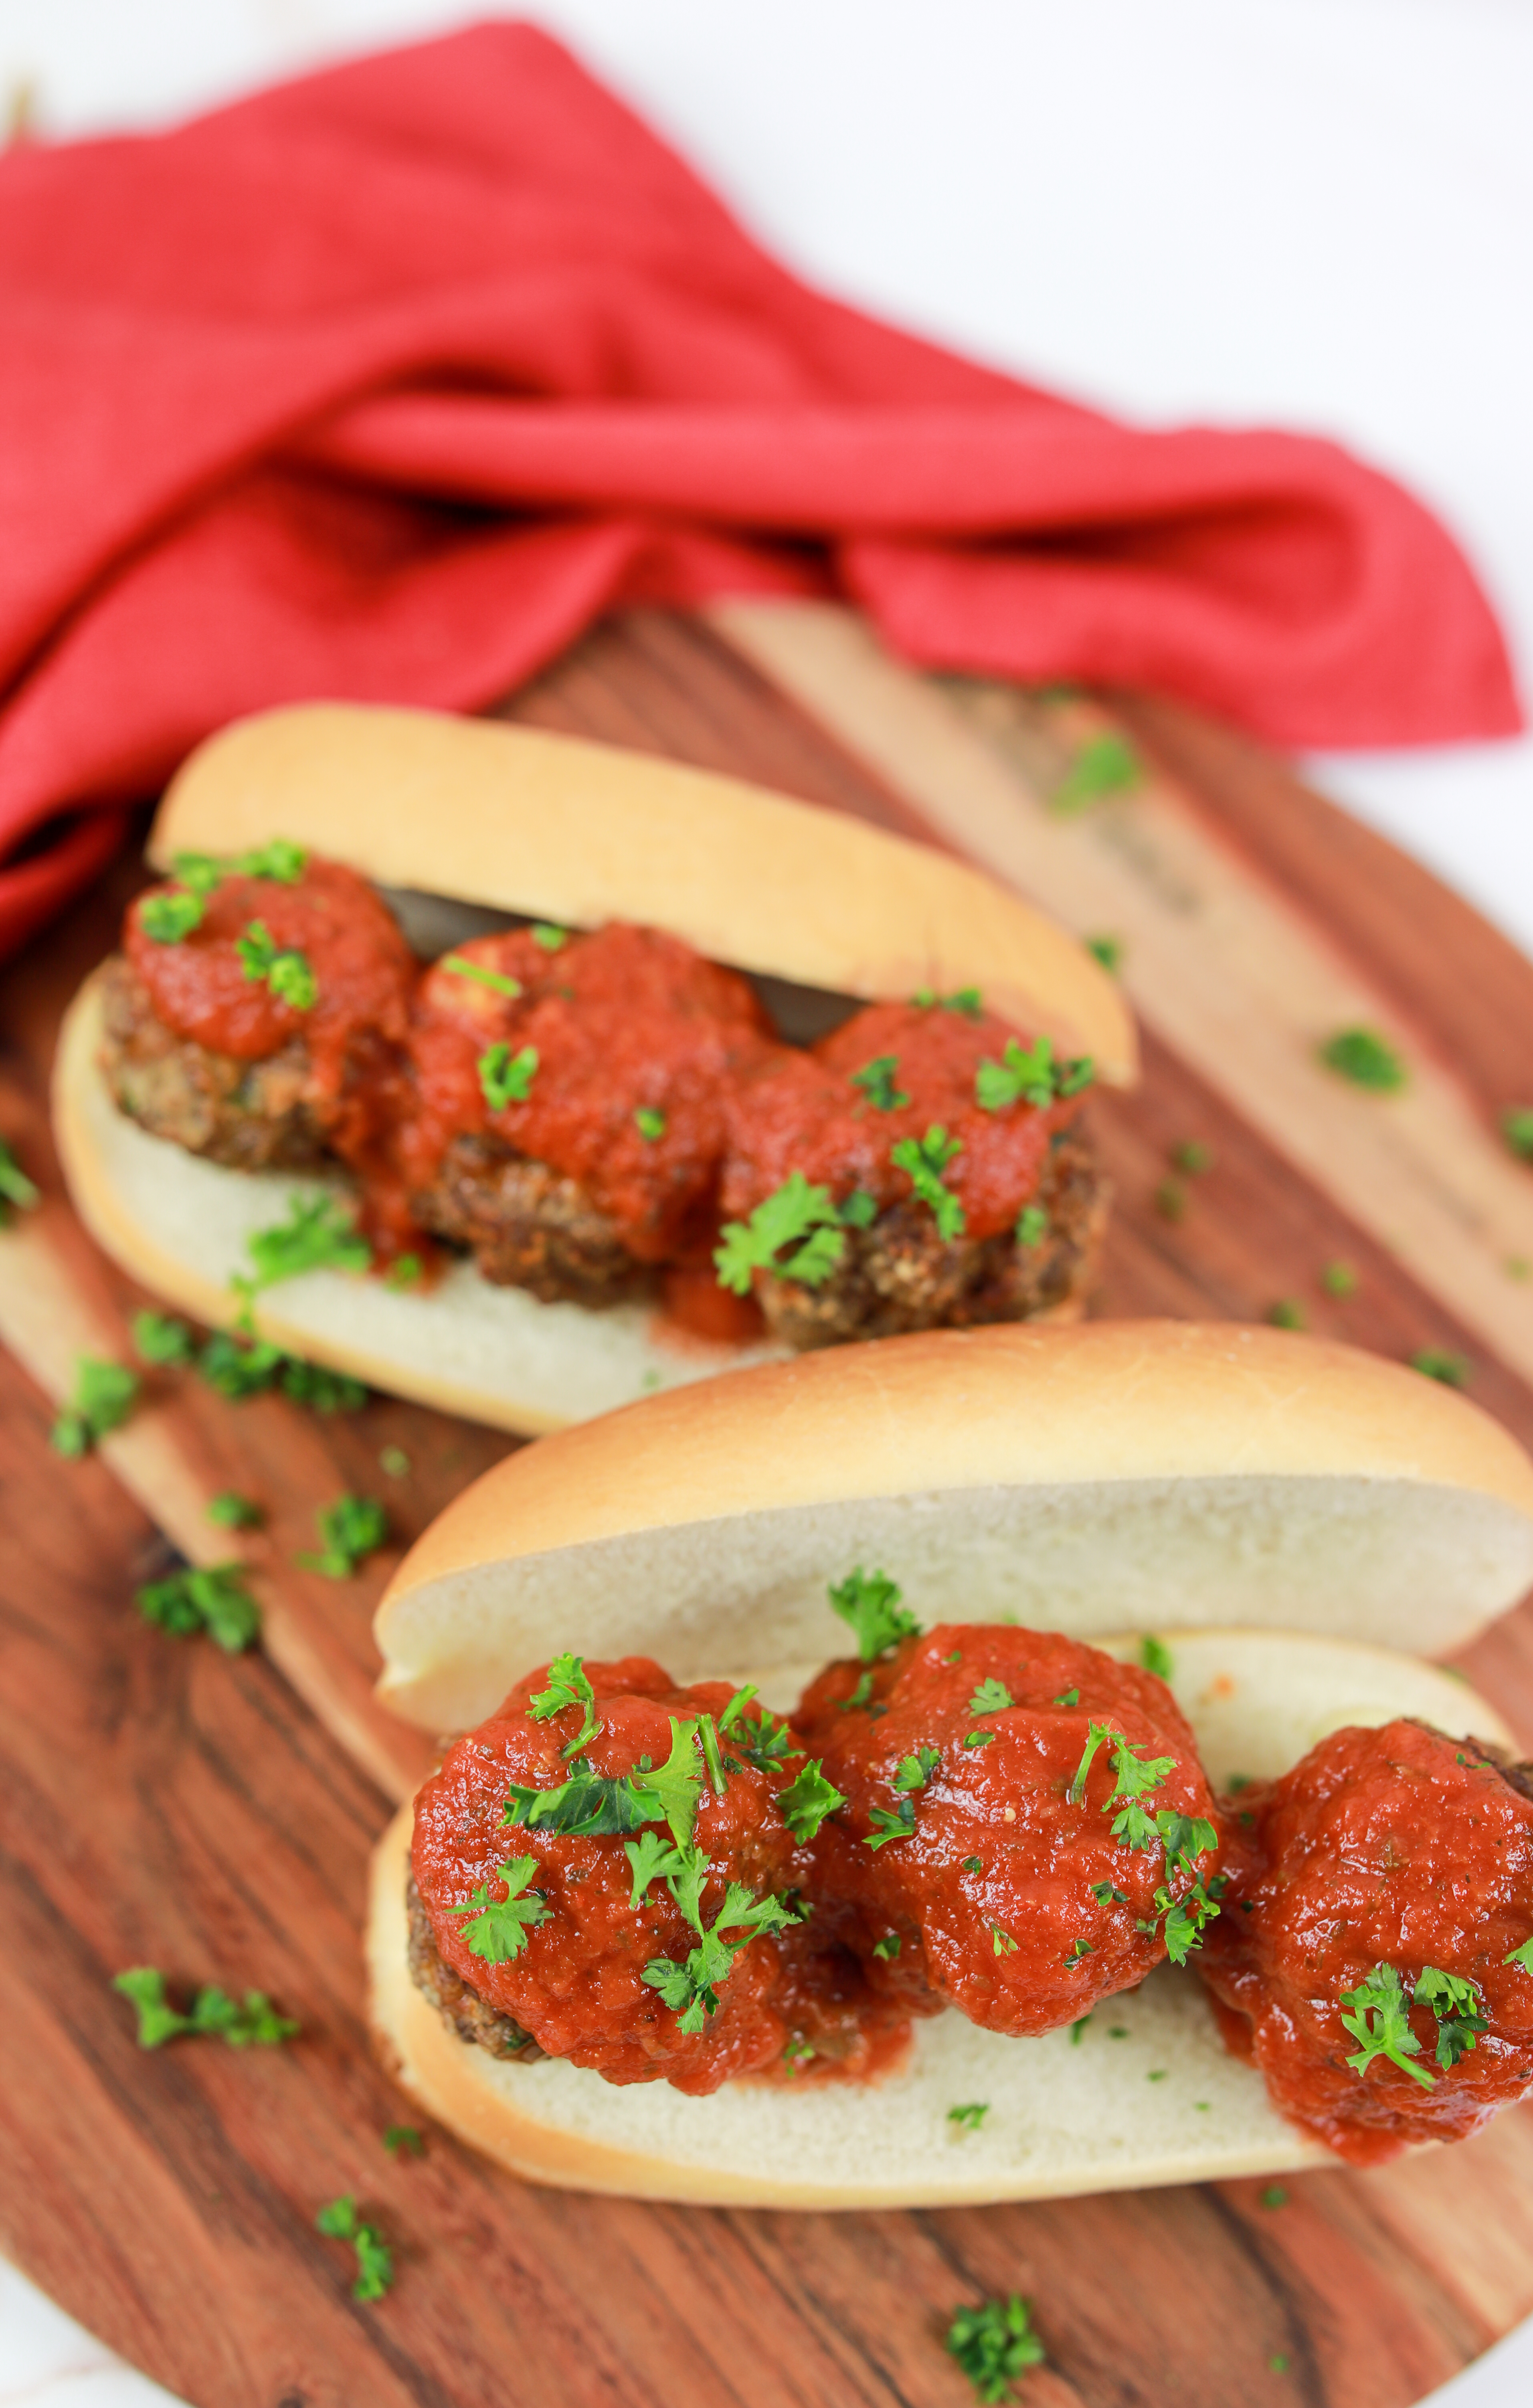 How To Make Copycat Subway Meatball Sandwich In Air Fryer